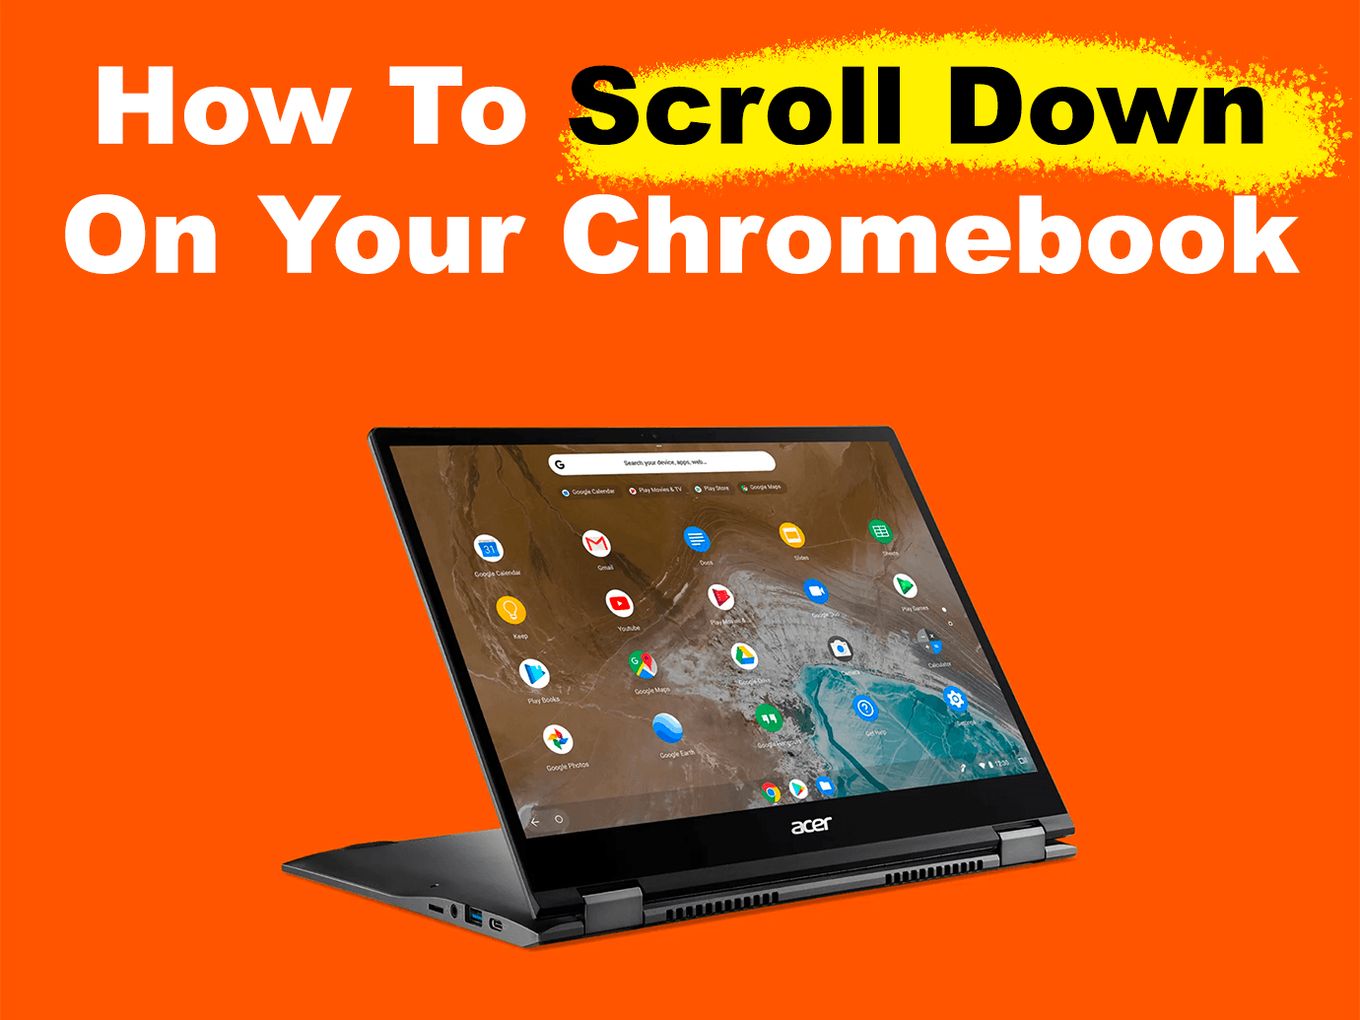 How To Scrol Down On Chromebook